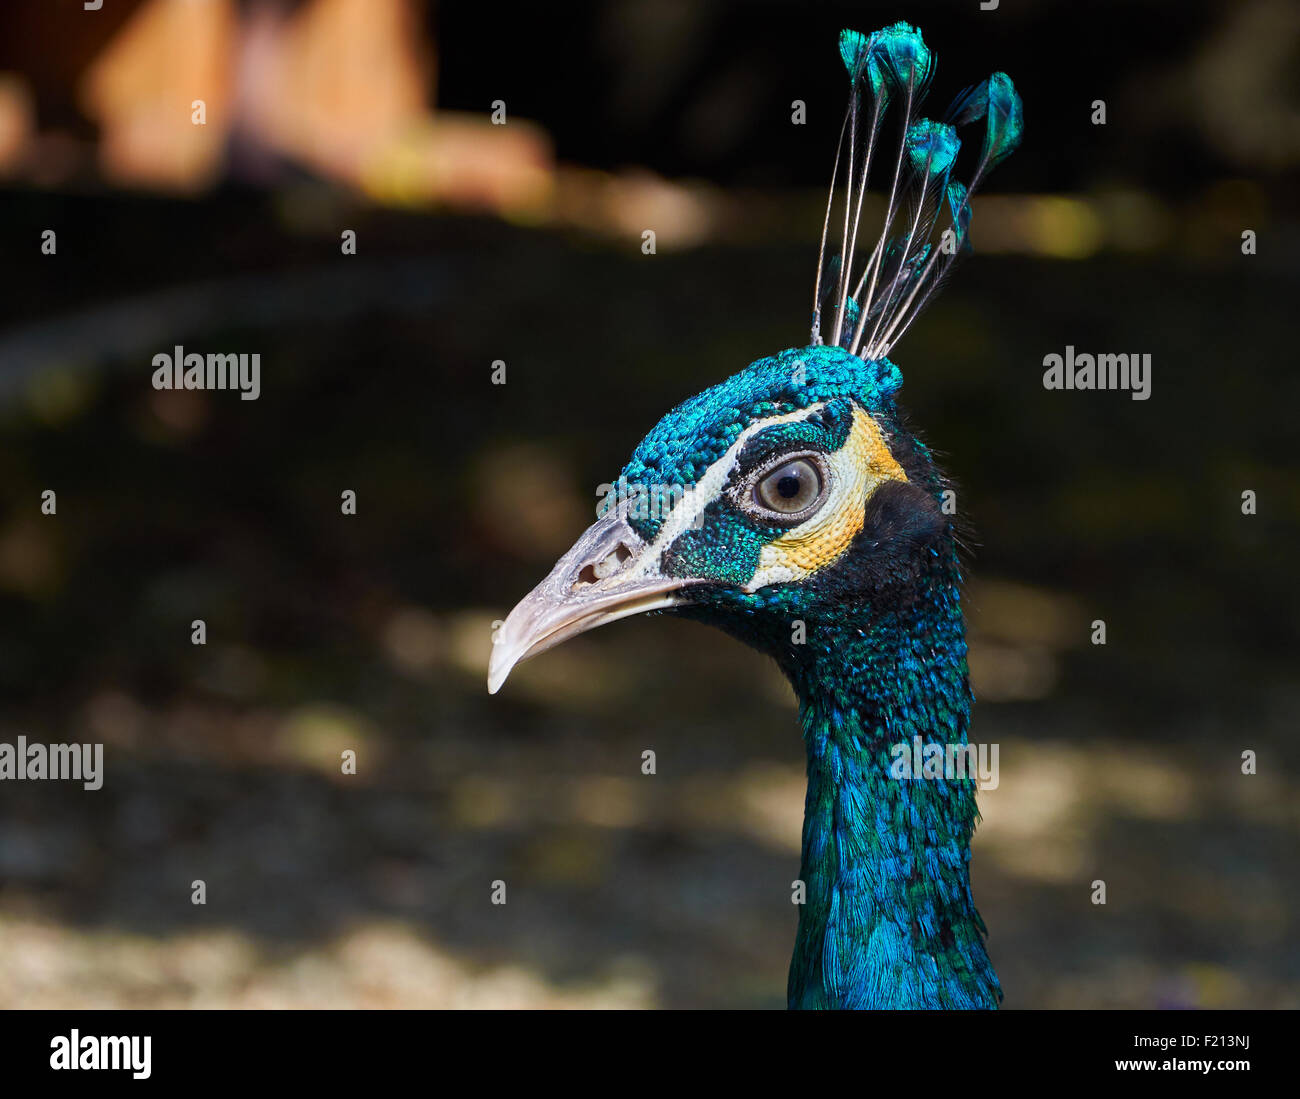 Bright head of Peacock with blue feathers o top Stock Photo